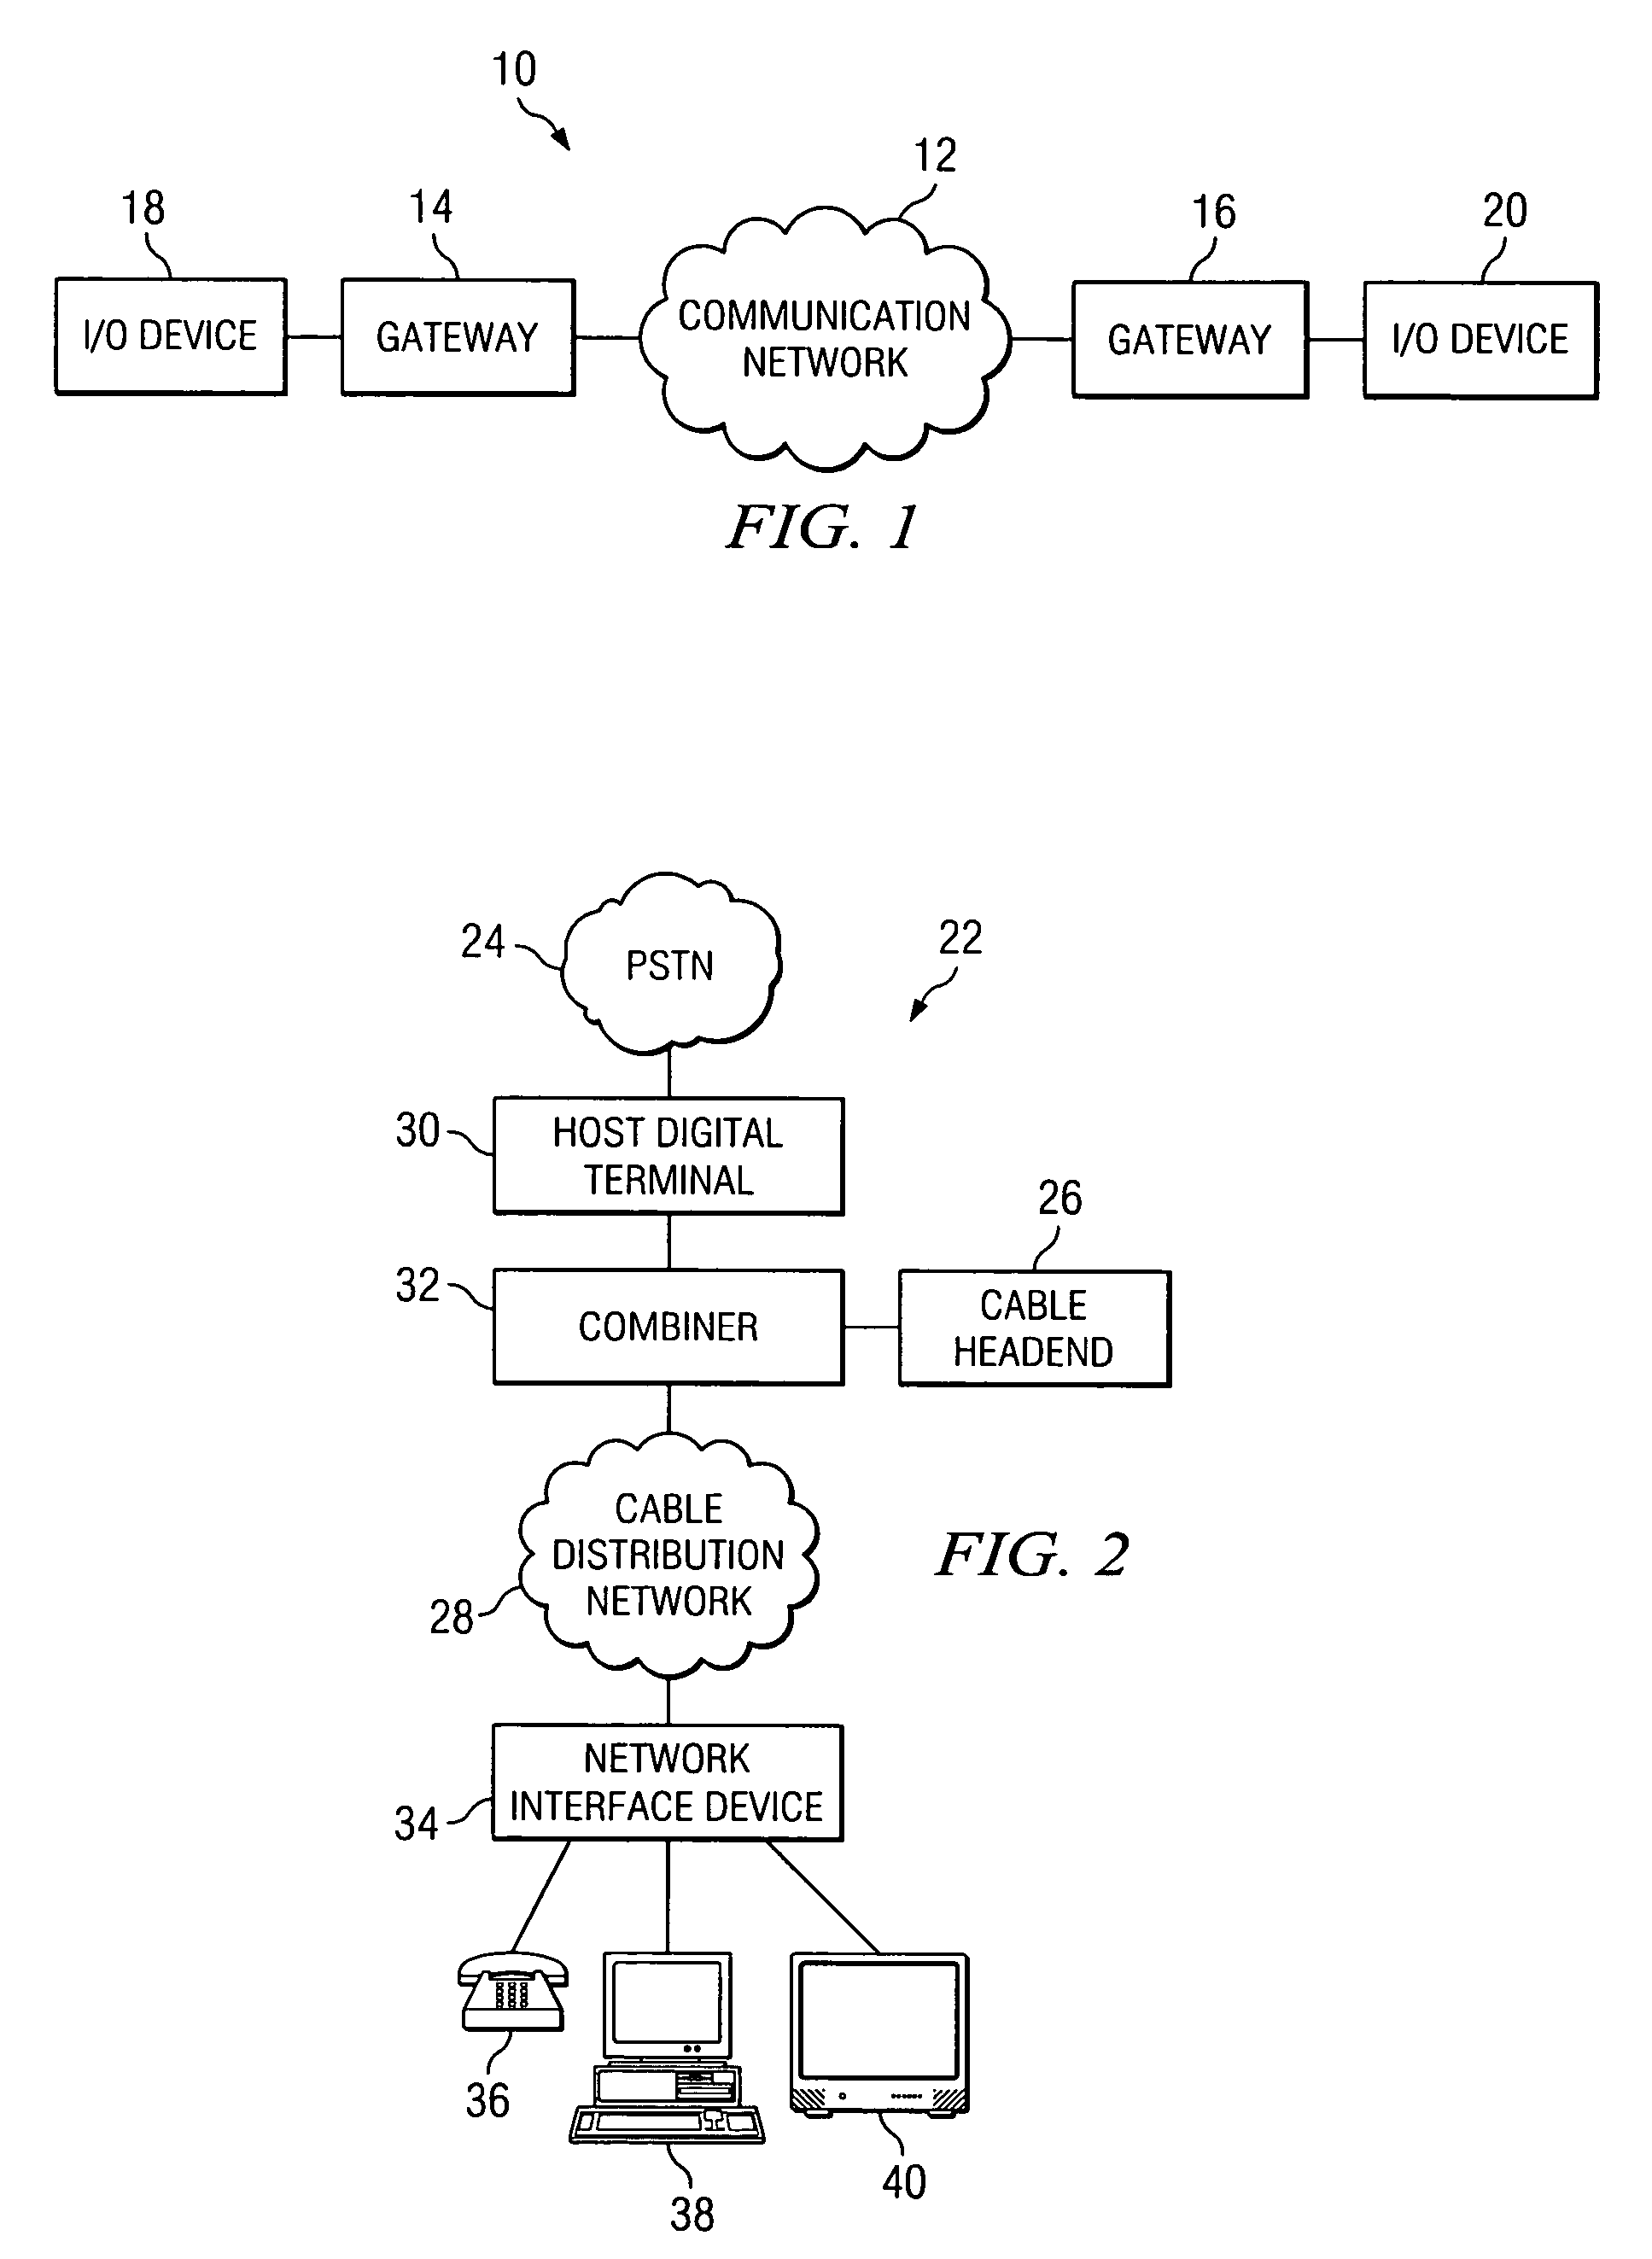 System, method and software for delivering targeted content to queued users